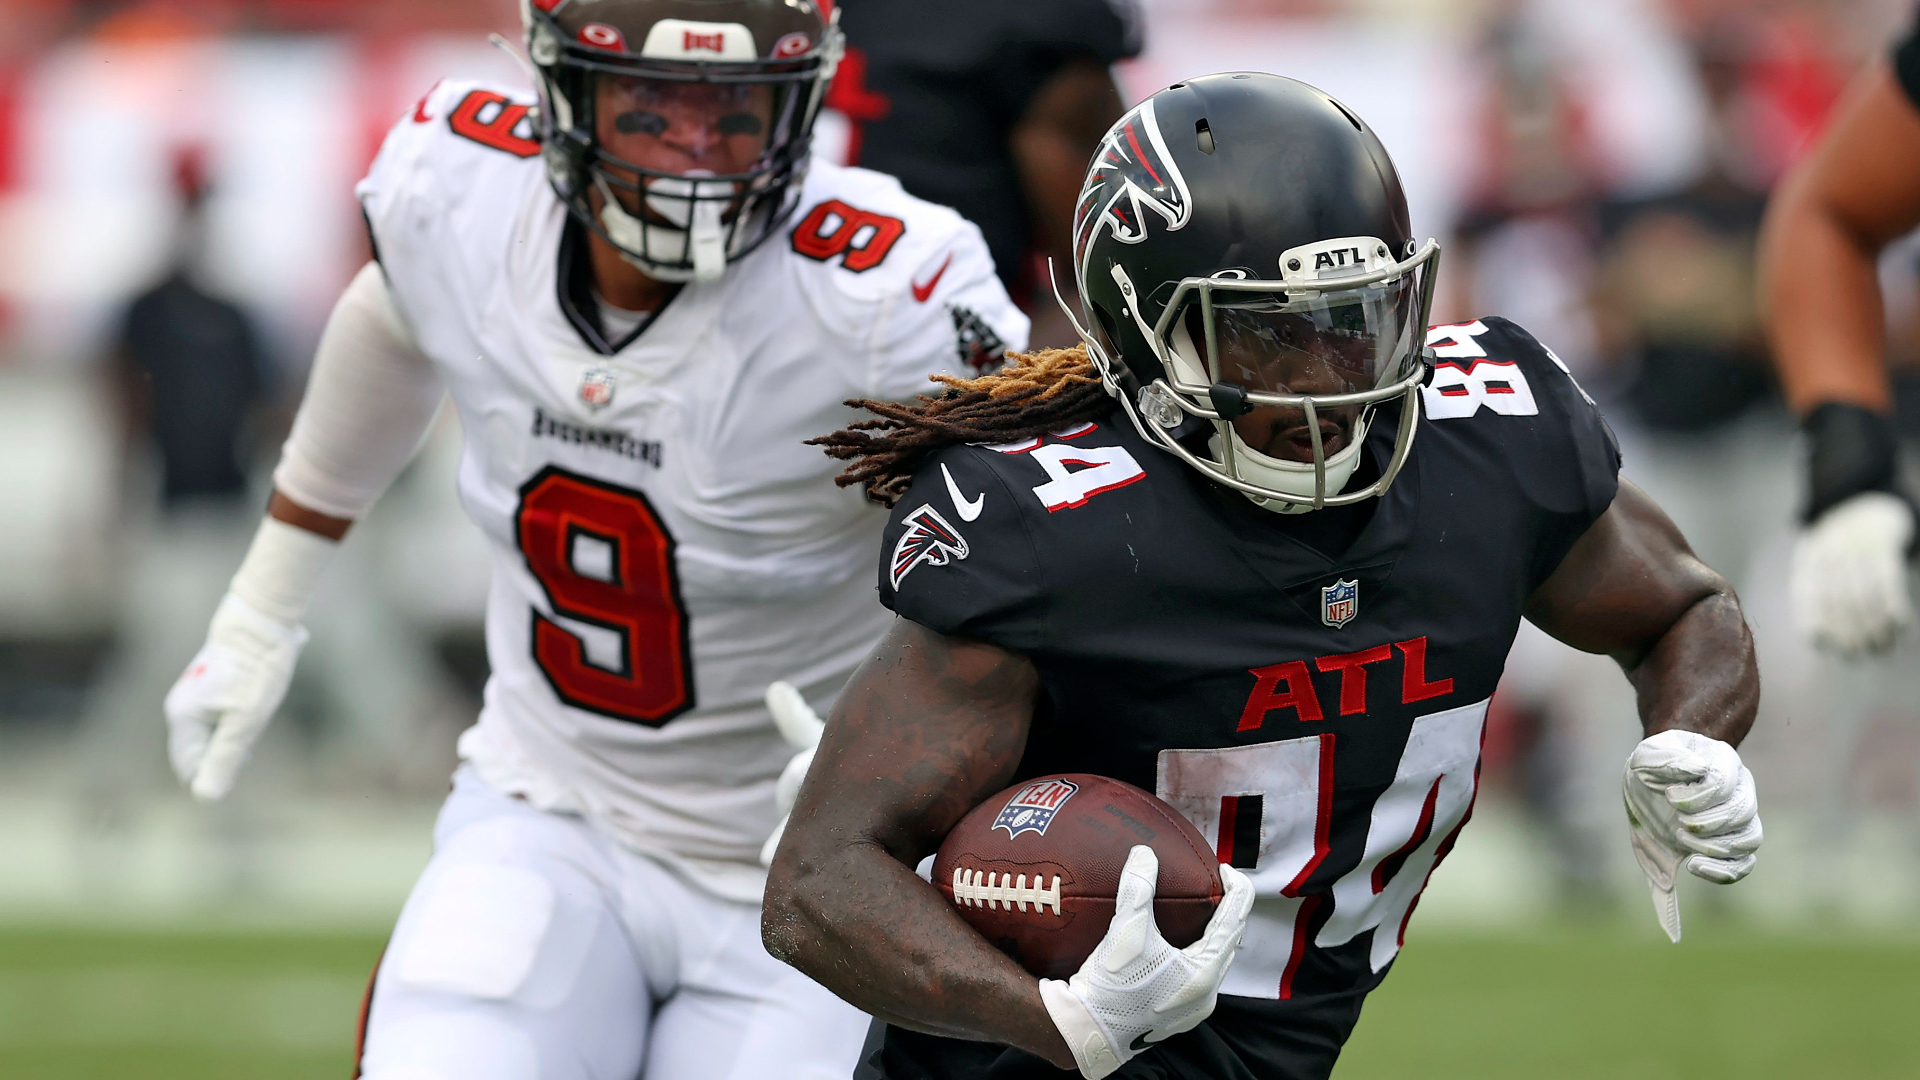 Cover 9@9: Cordarrelle Patterson is Falcons' top weapon so far